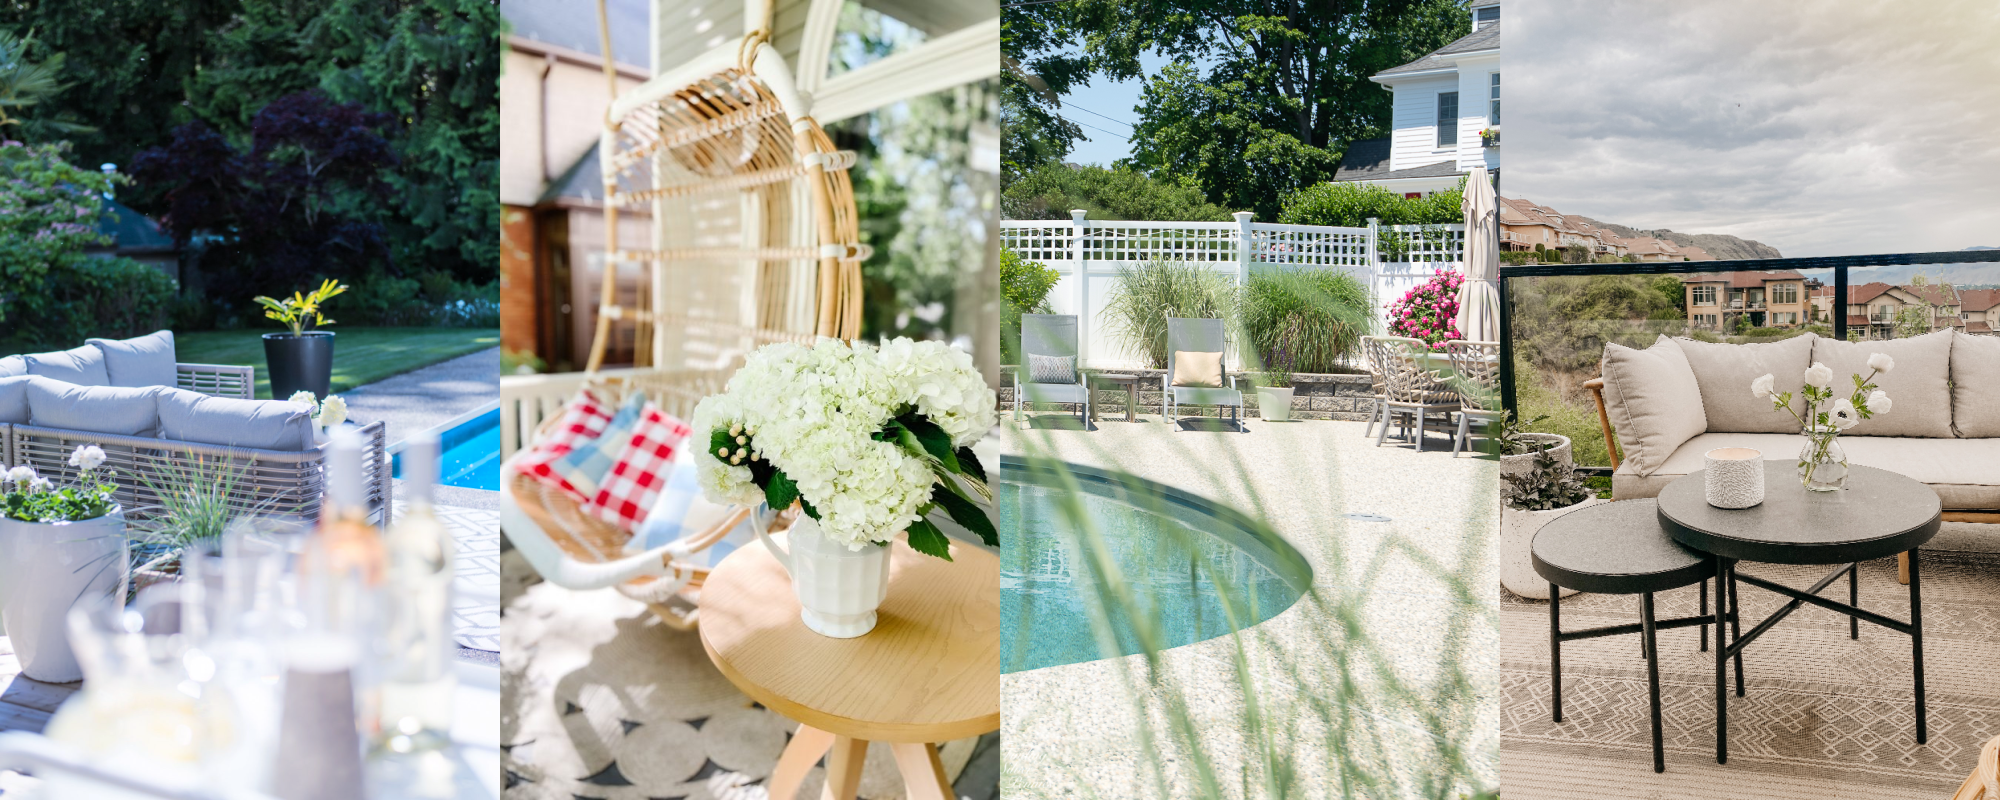  Family Patio Ideas by popular Alabama life and style blog, She Gave It A Go: collage image of a wicker sectional couch with grey cushions next to a swimming pool, hanging rattan chair next to a round wooden table with a white vase filled with white hydrangea flowers, and a black metal coffee table next to a outdoor couch with taupe colored cushions. 